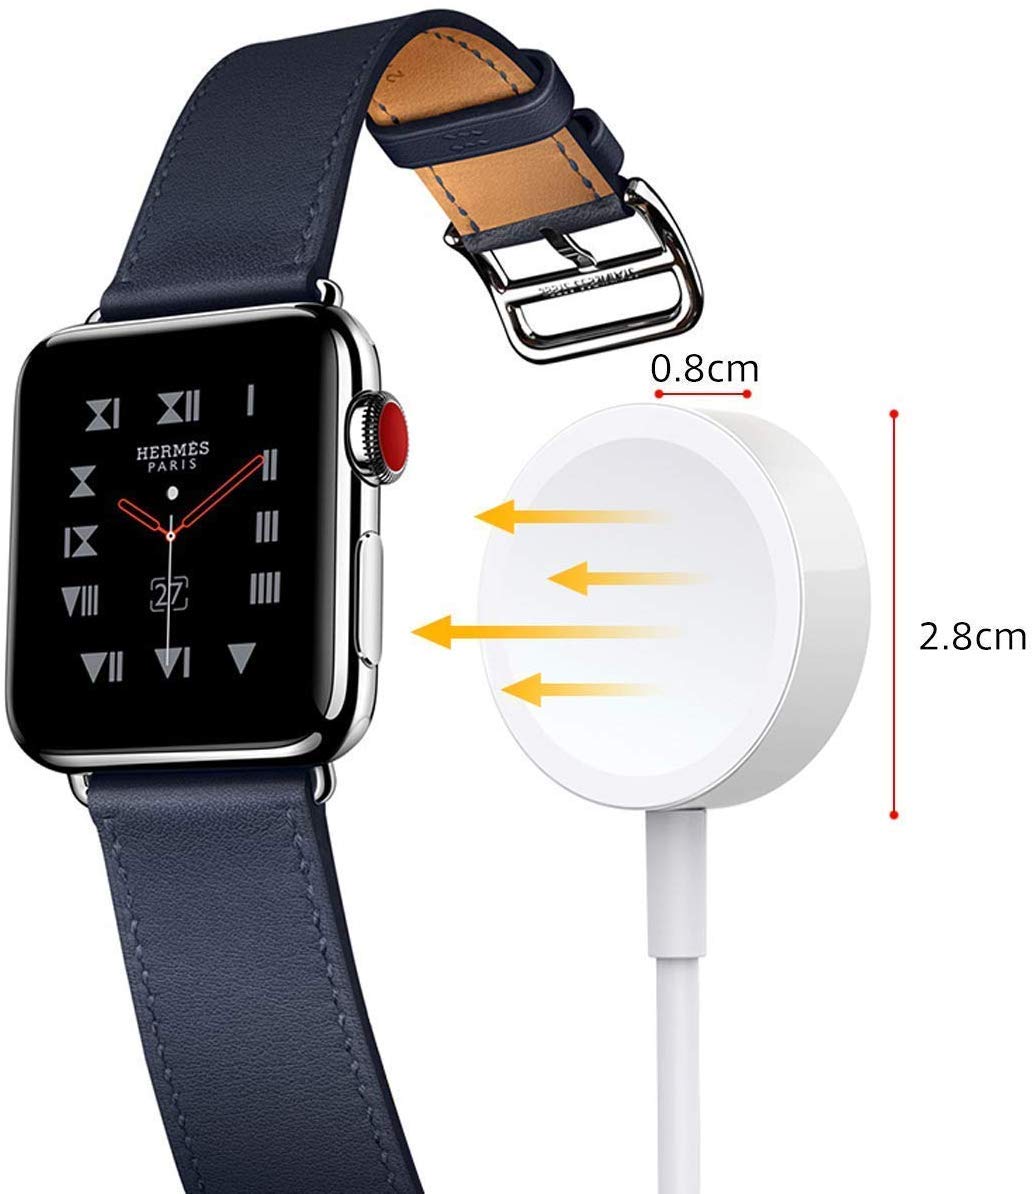 Magnetic Fast Charger for Apple Watch